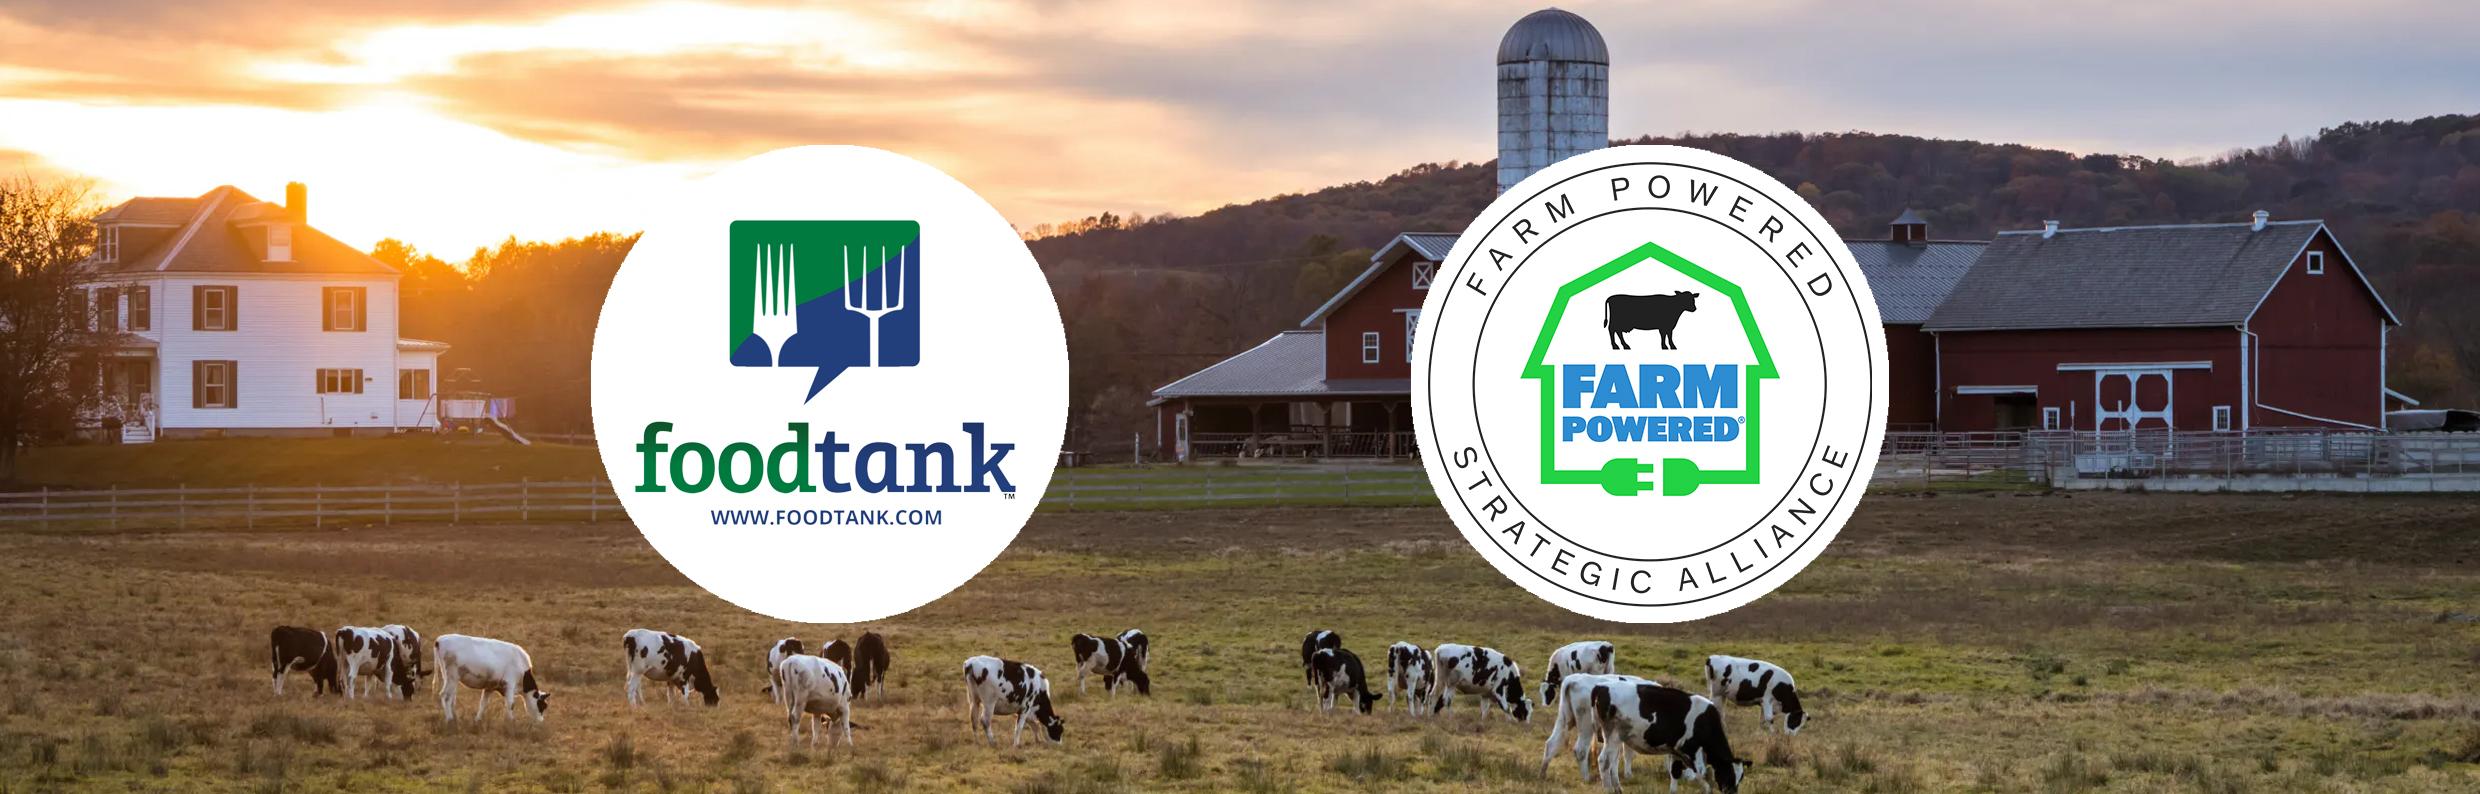 Logos of Food Tank and Farm Powered Strategic Alliance, with a background image of a farm using anaerobic digestion